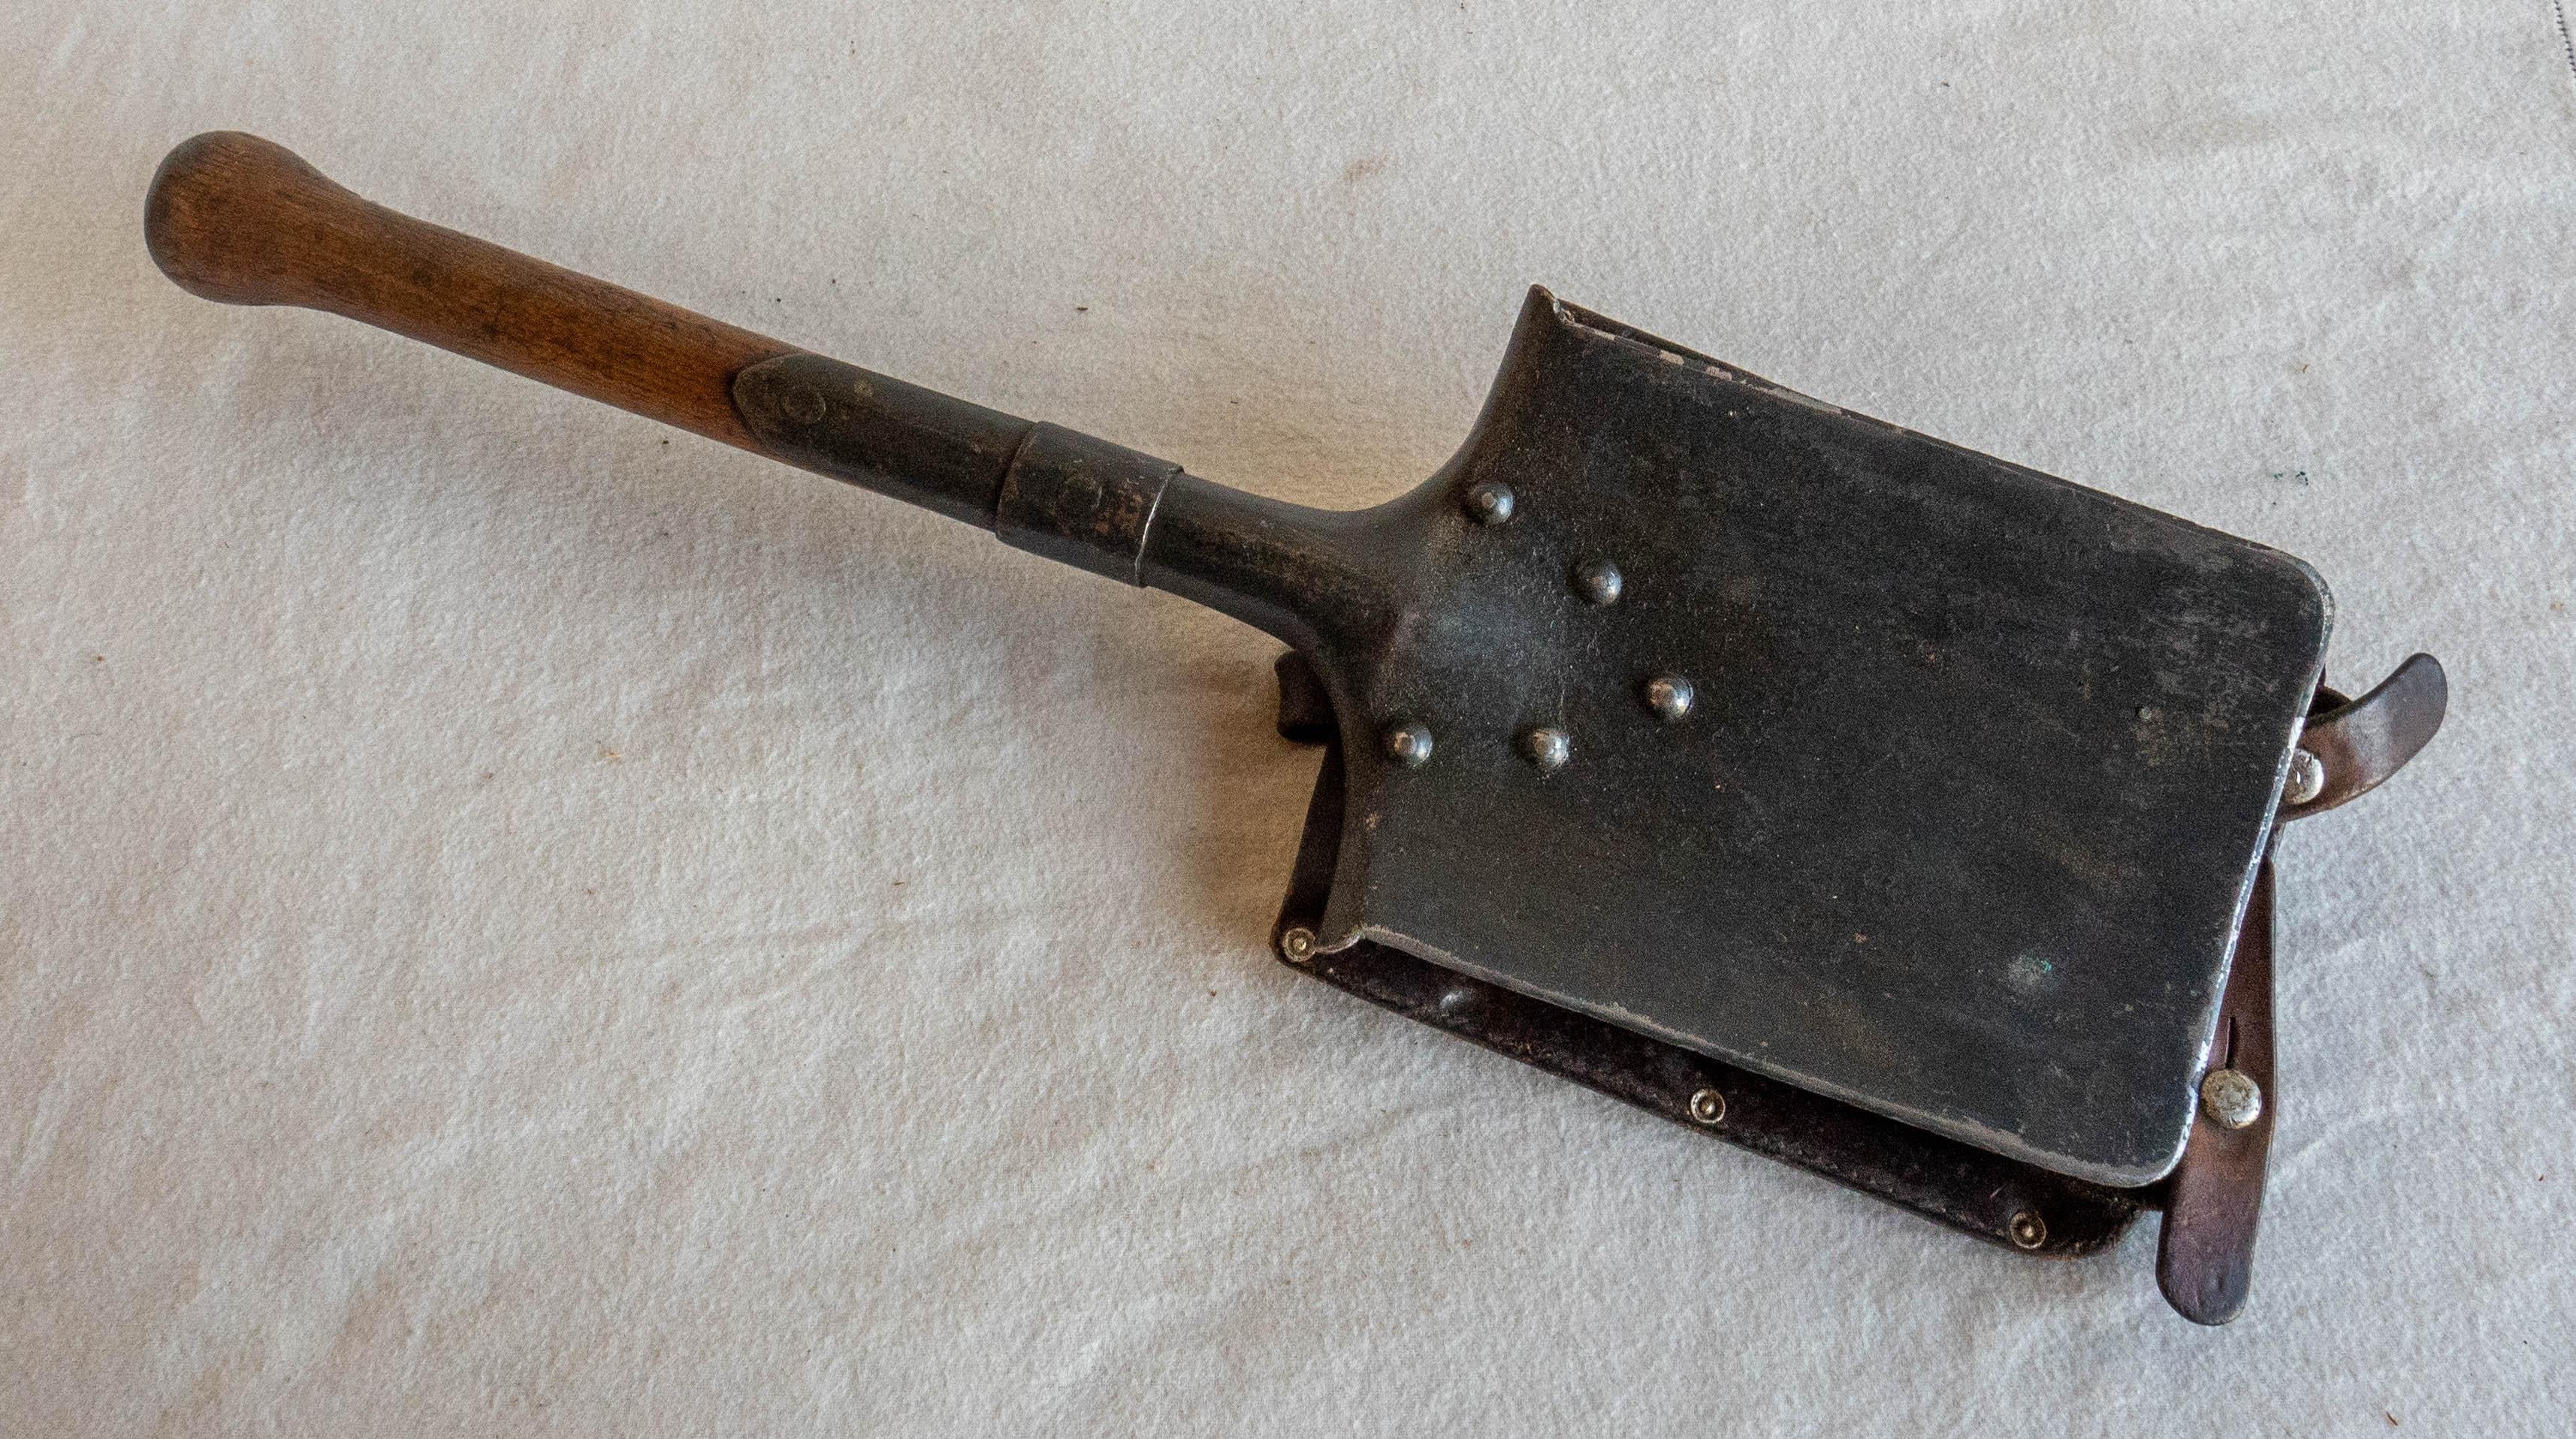 A military grade forged metal shovel with a protective leather cover used by the Swiss Army mountaineers during World War II.